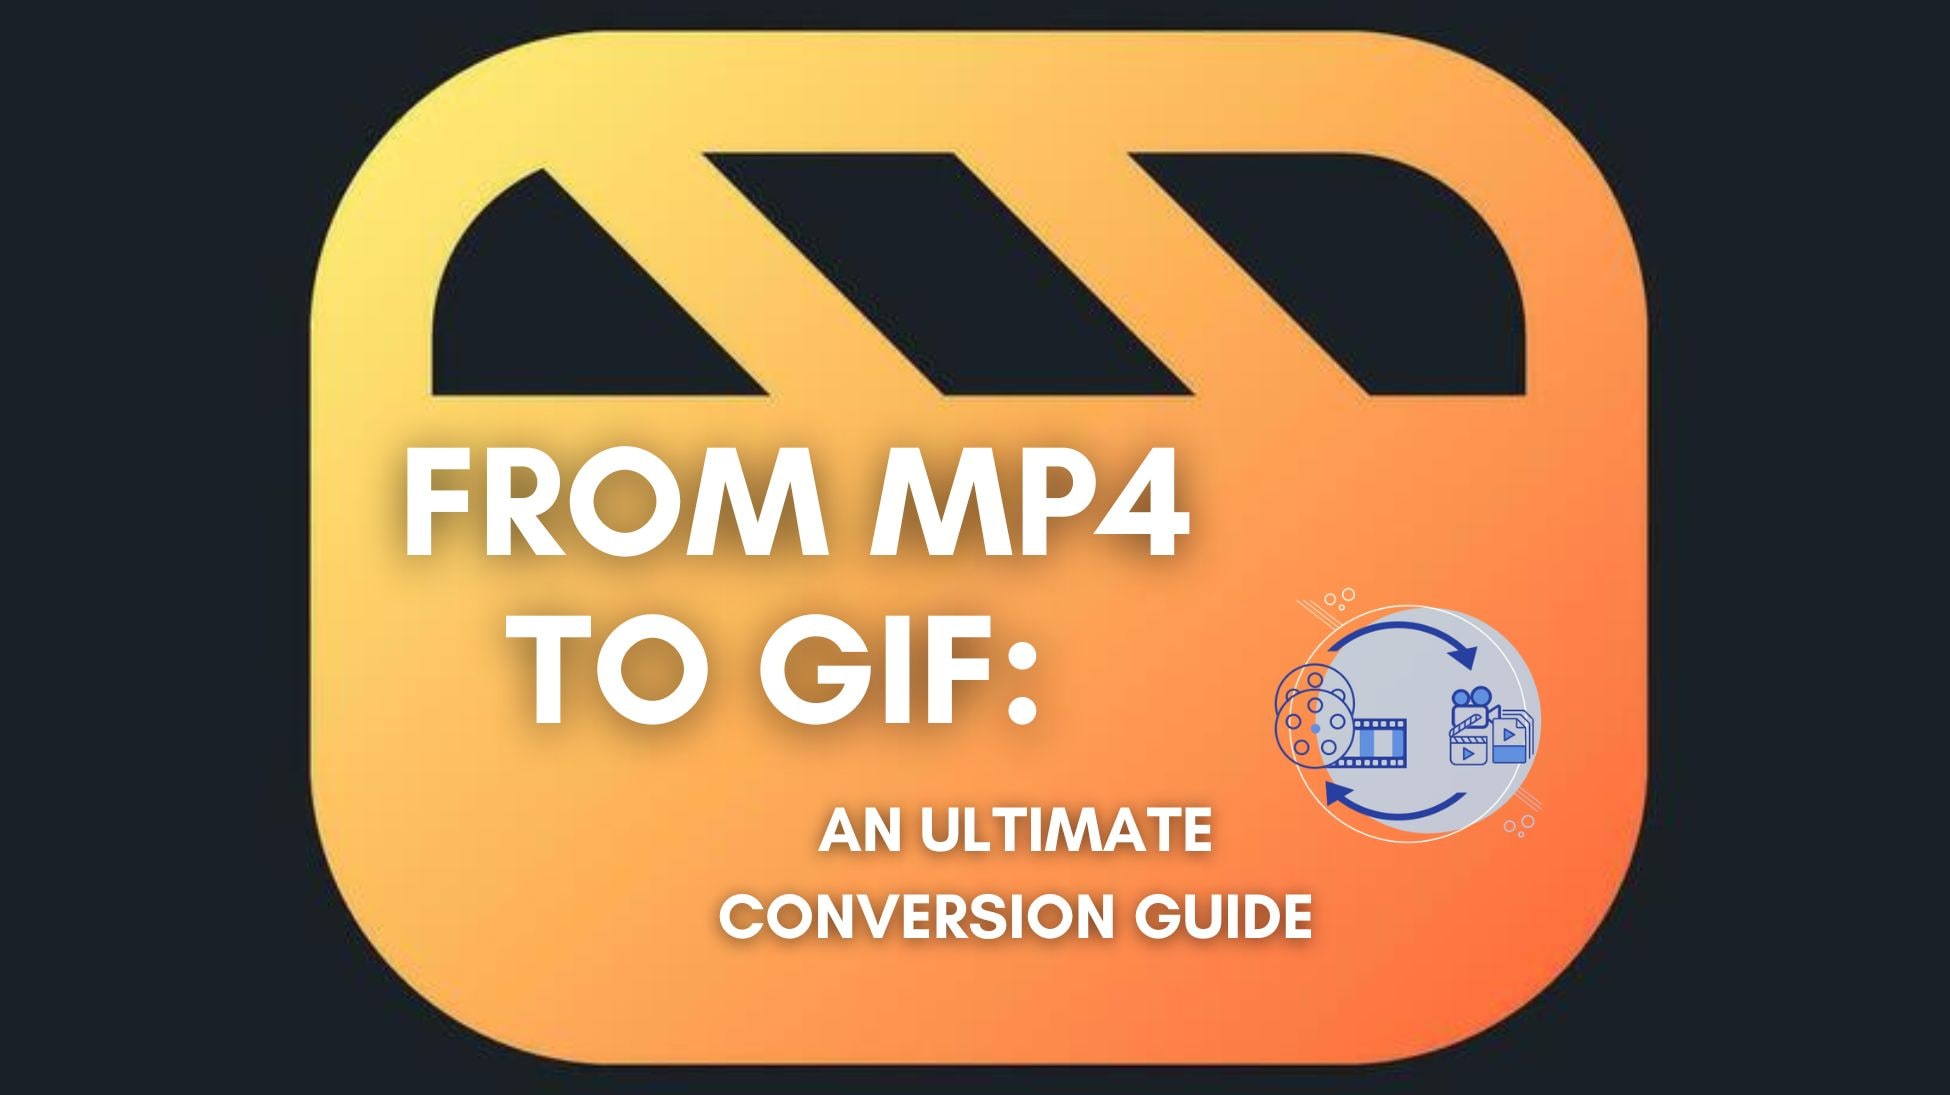 From MP4 to GIF: An Ultimate Conversion Guide